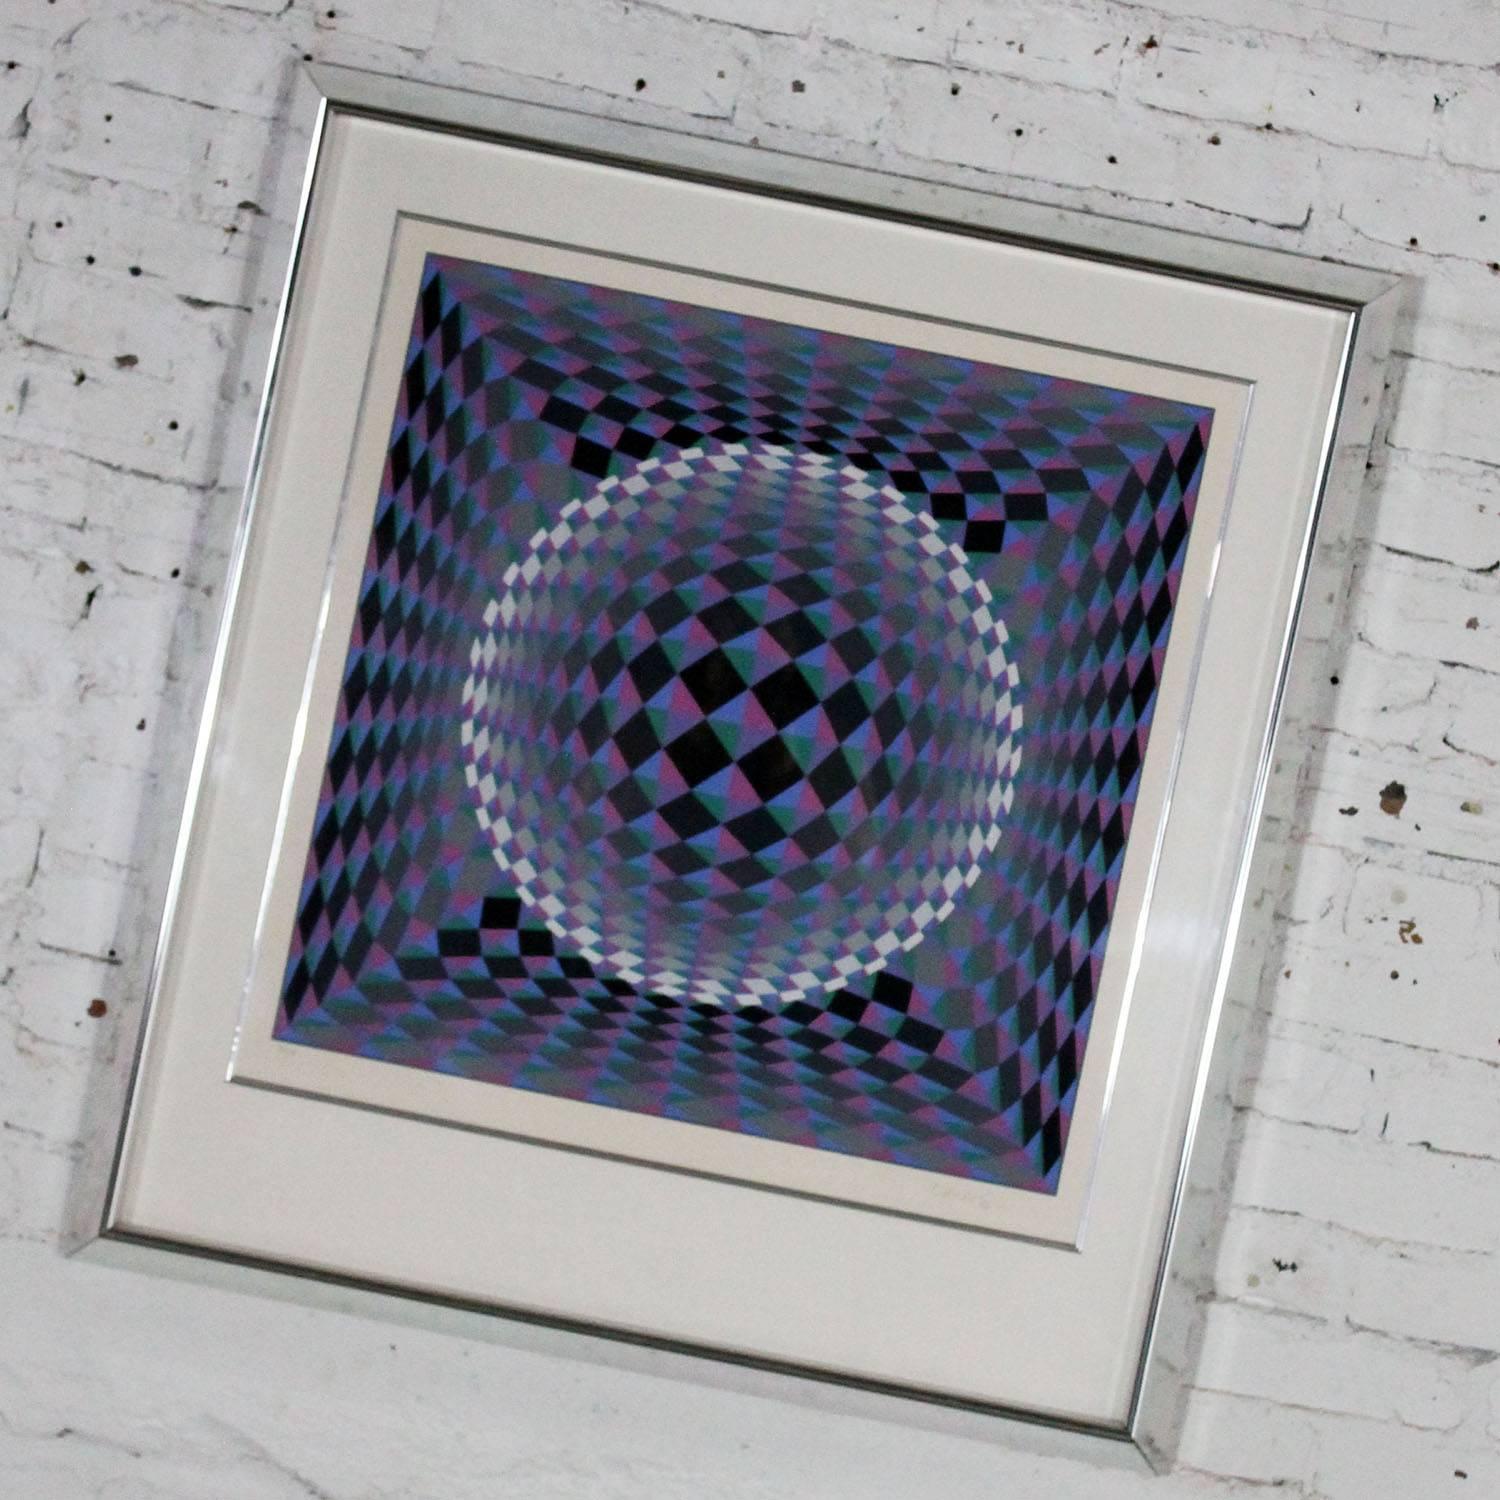 Incredible serigraph by world renowned Kinetic and Op Art artist, Victor Vasarely. This piece is titled Athmos and is pencil signed and numbered 253/300. It was originally sold by Park West Galleries, circa 1985 and has a registration number of